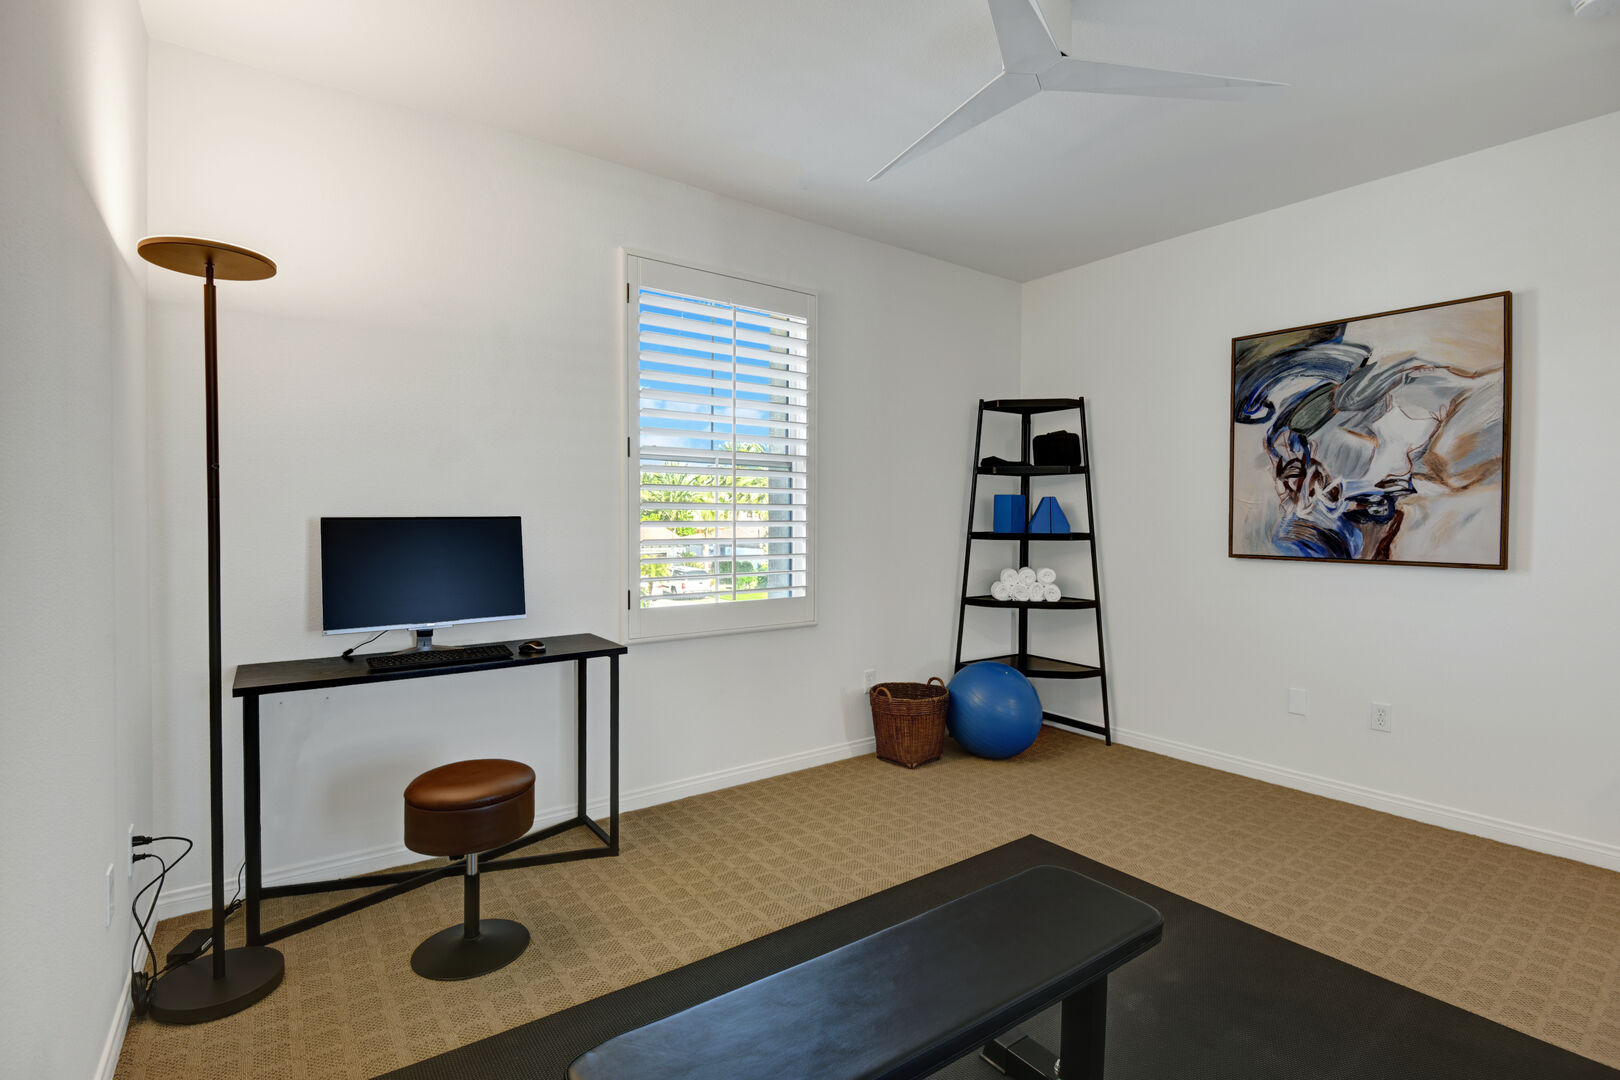 Bonus Room 4 is located next to Hallway Bathroom 2 and offers versatile functionality as a private exercise room or office space.